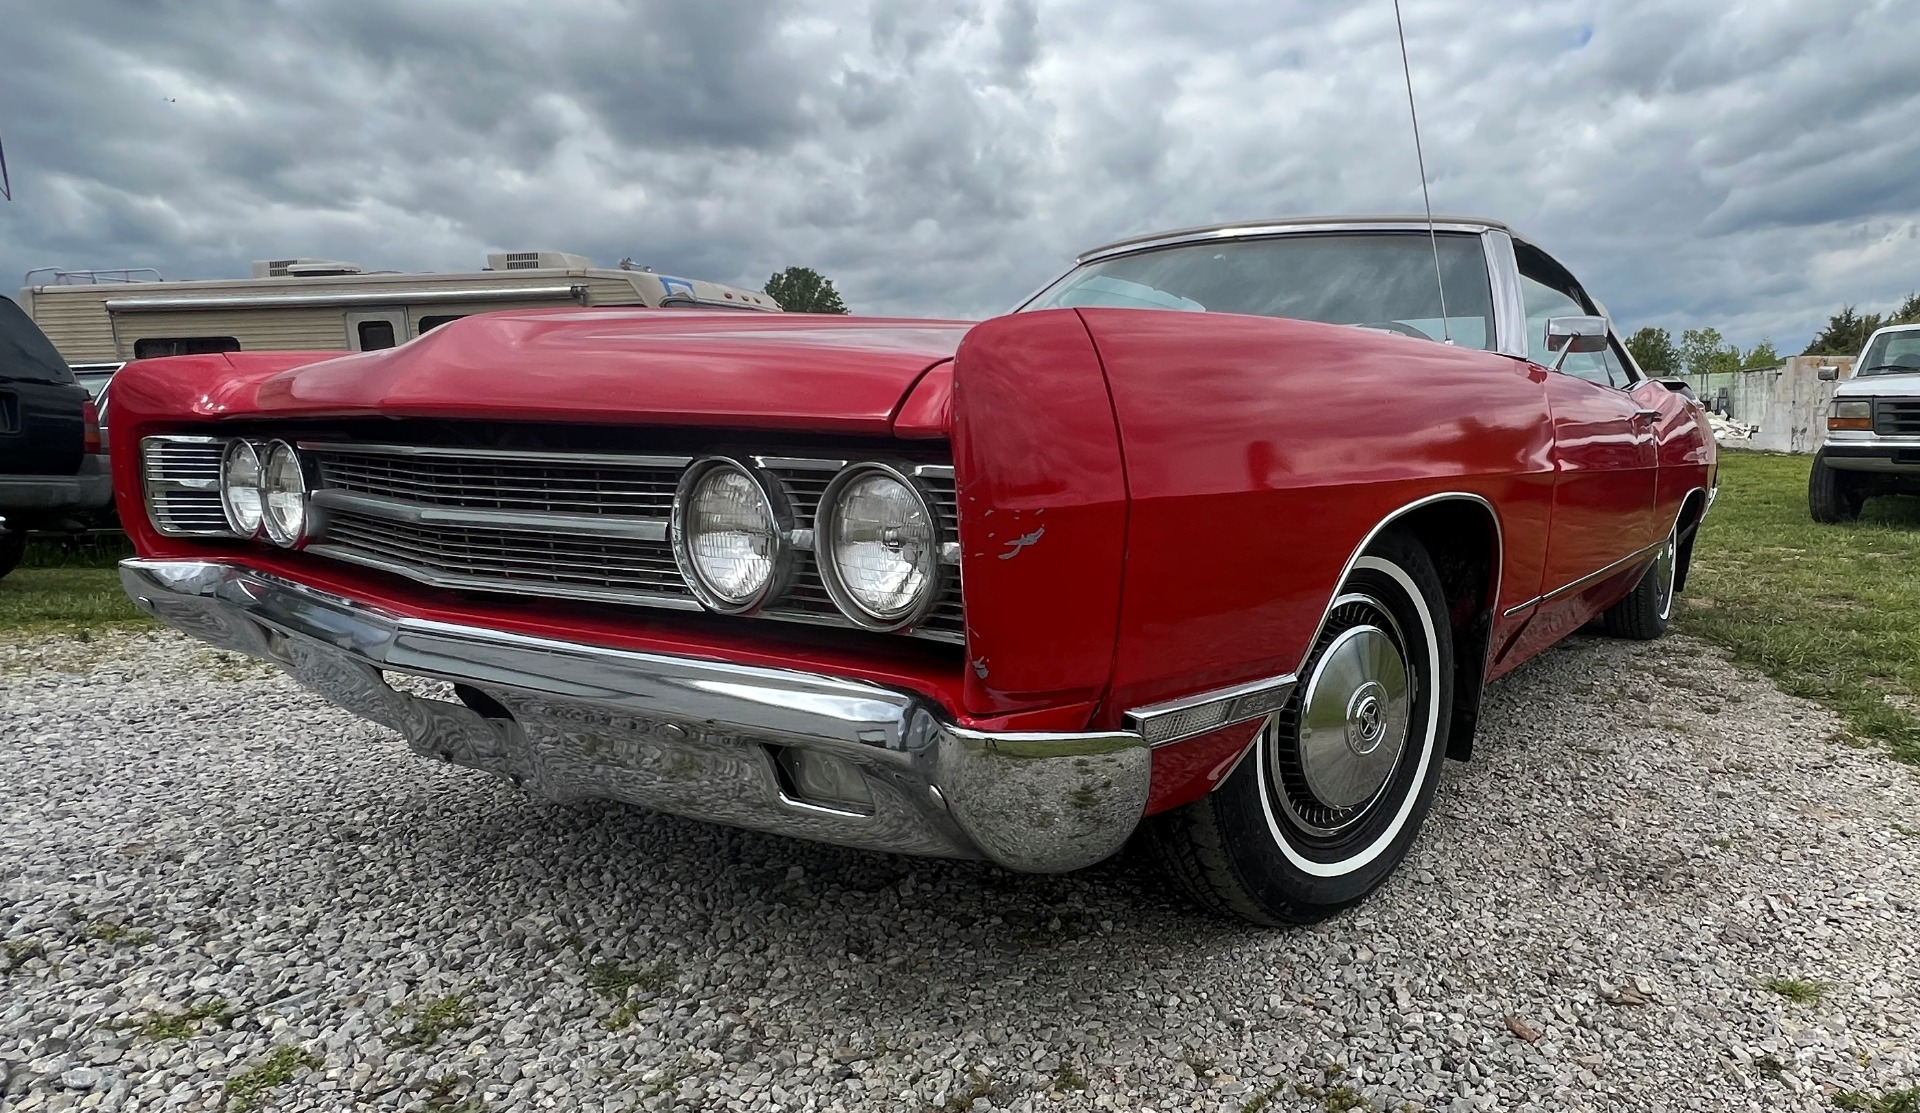 Used 1969 Ford Galaxie 500